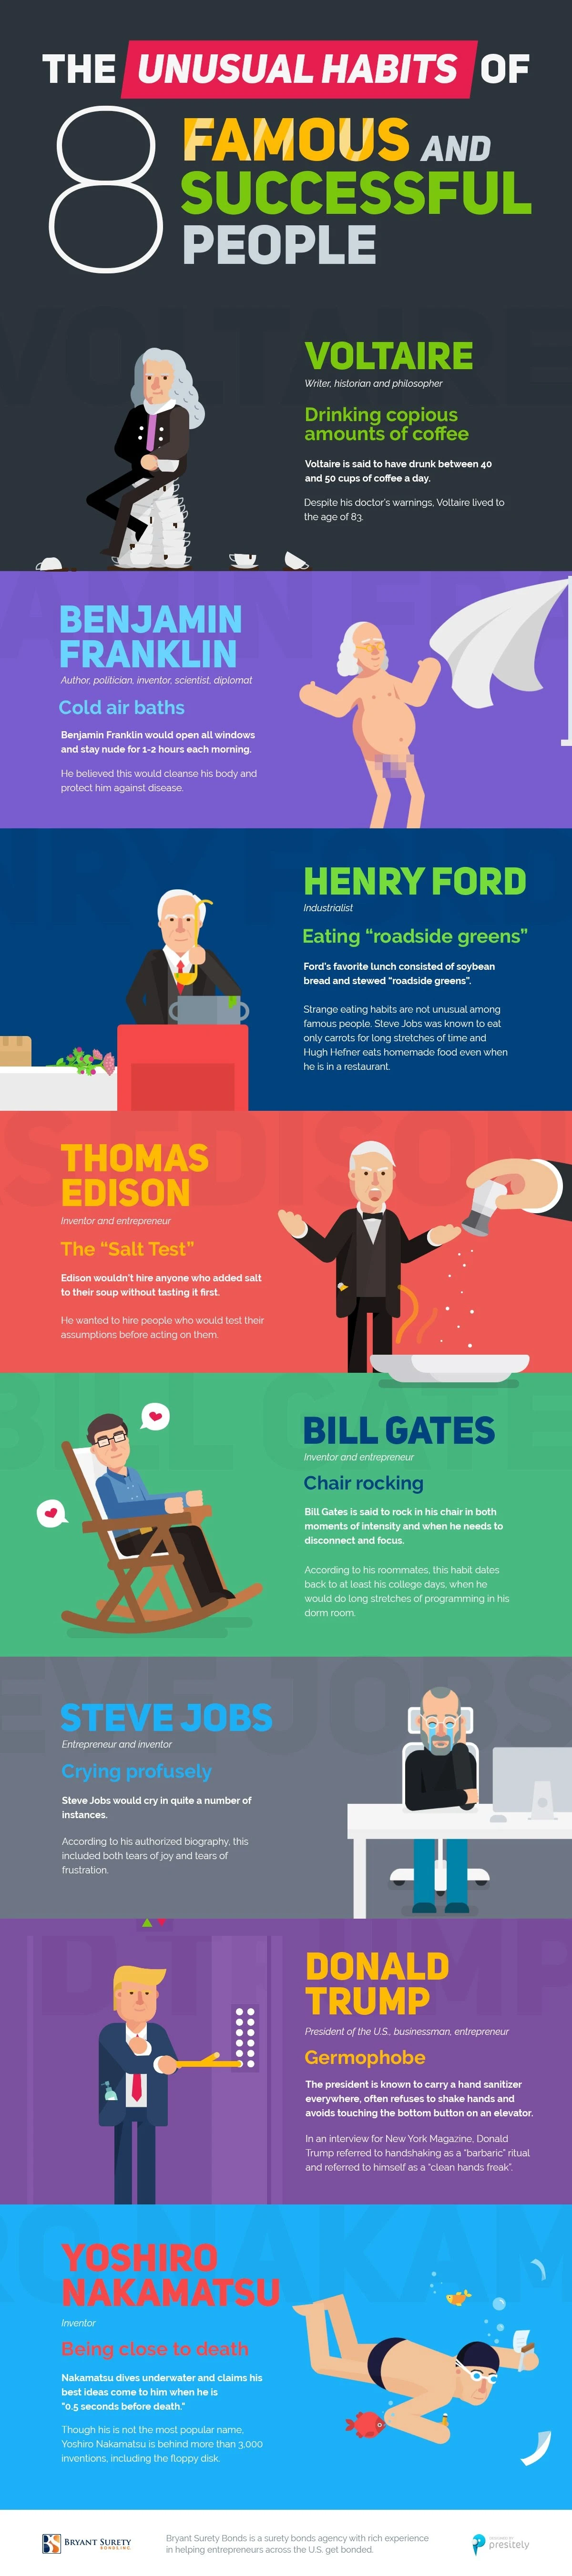 The Unusual Habits of 8 Famous and Successful People (Infographic)